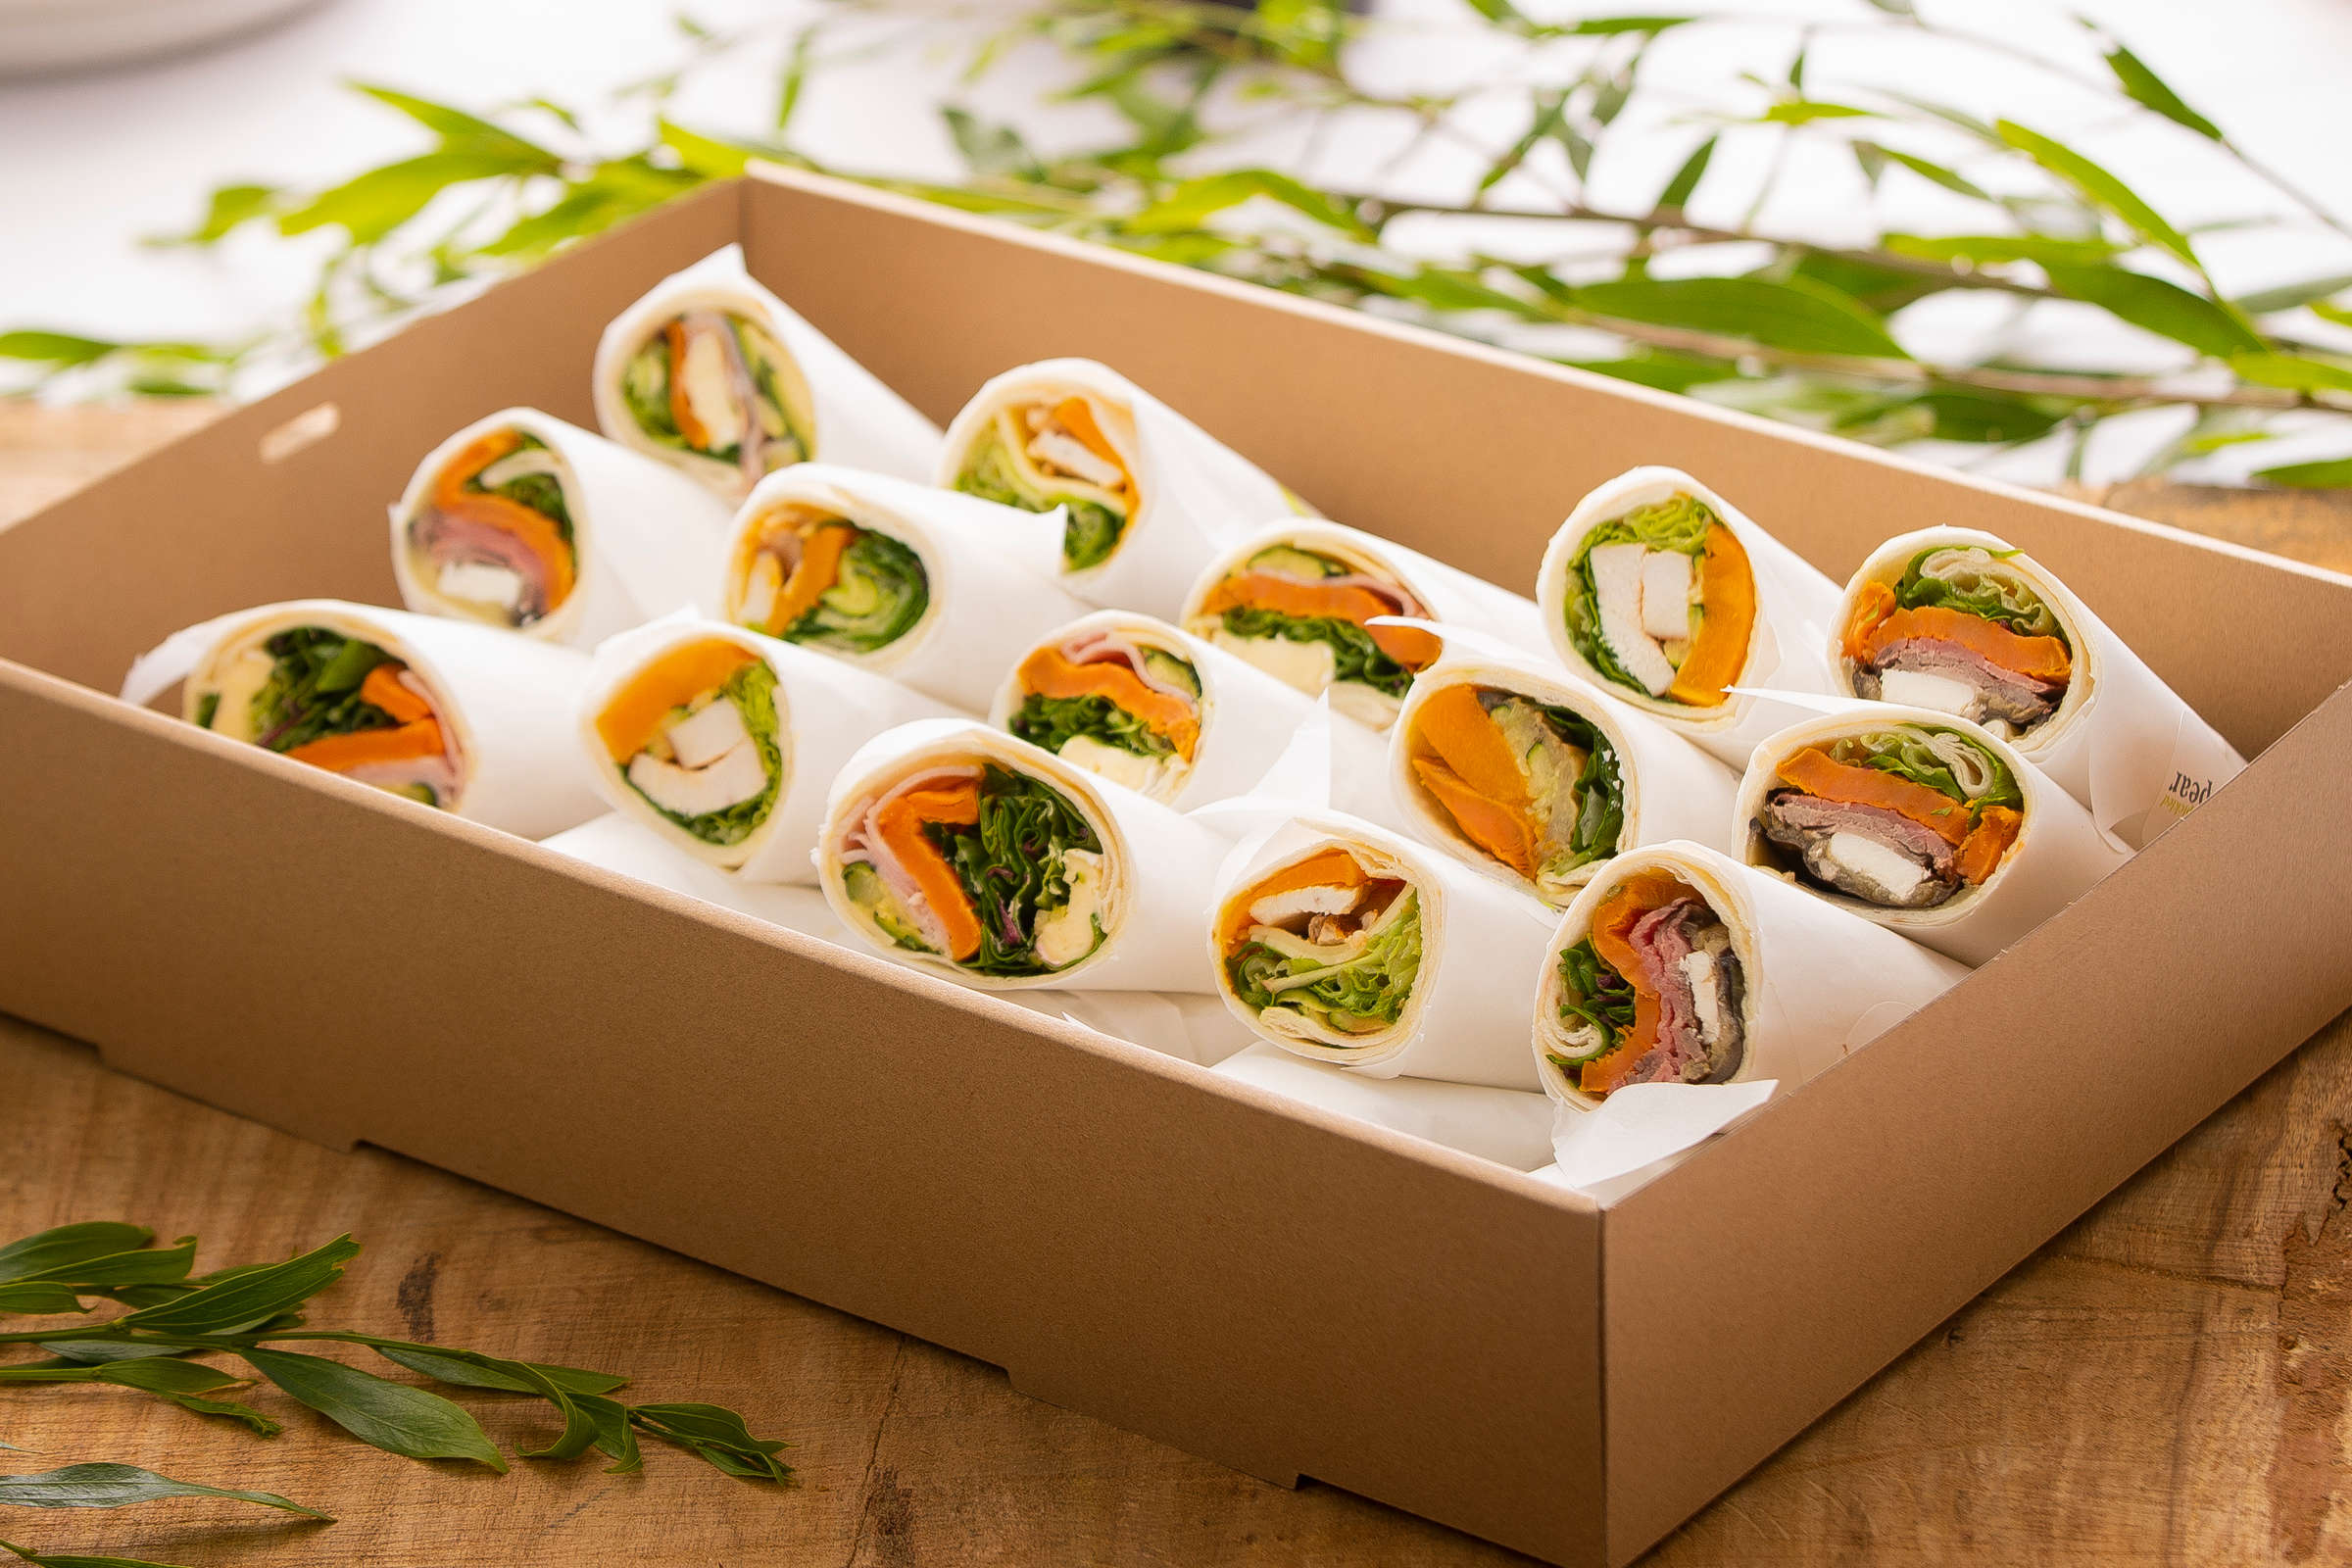 Wrap catering box containing 20 pieces, fillings include roasted vegetable, free range ham and salad, chicken and salad. Credit: Richard Jupe.